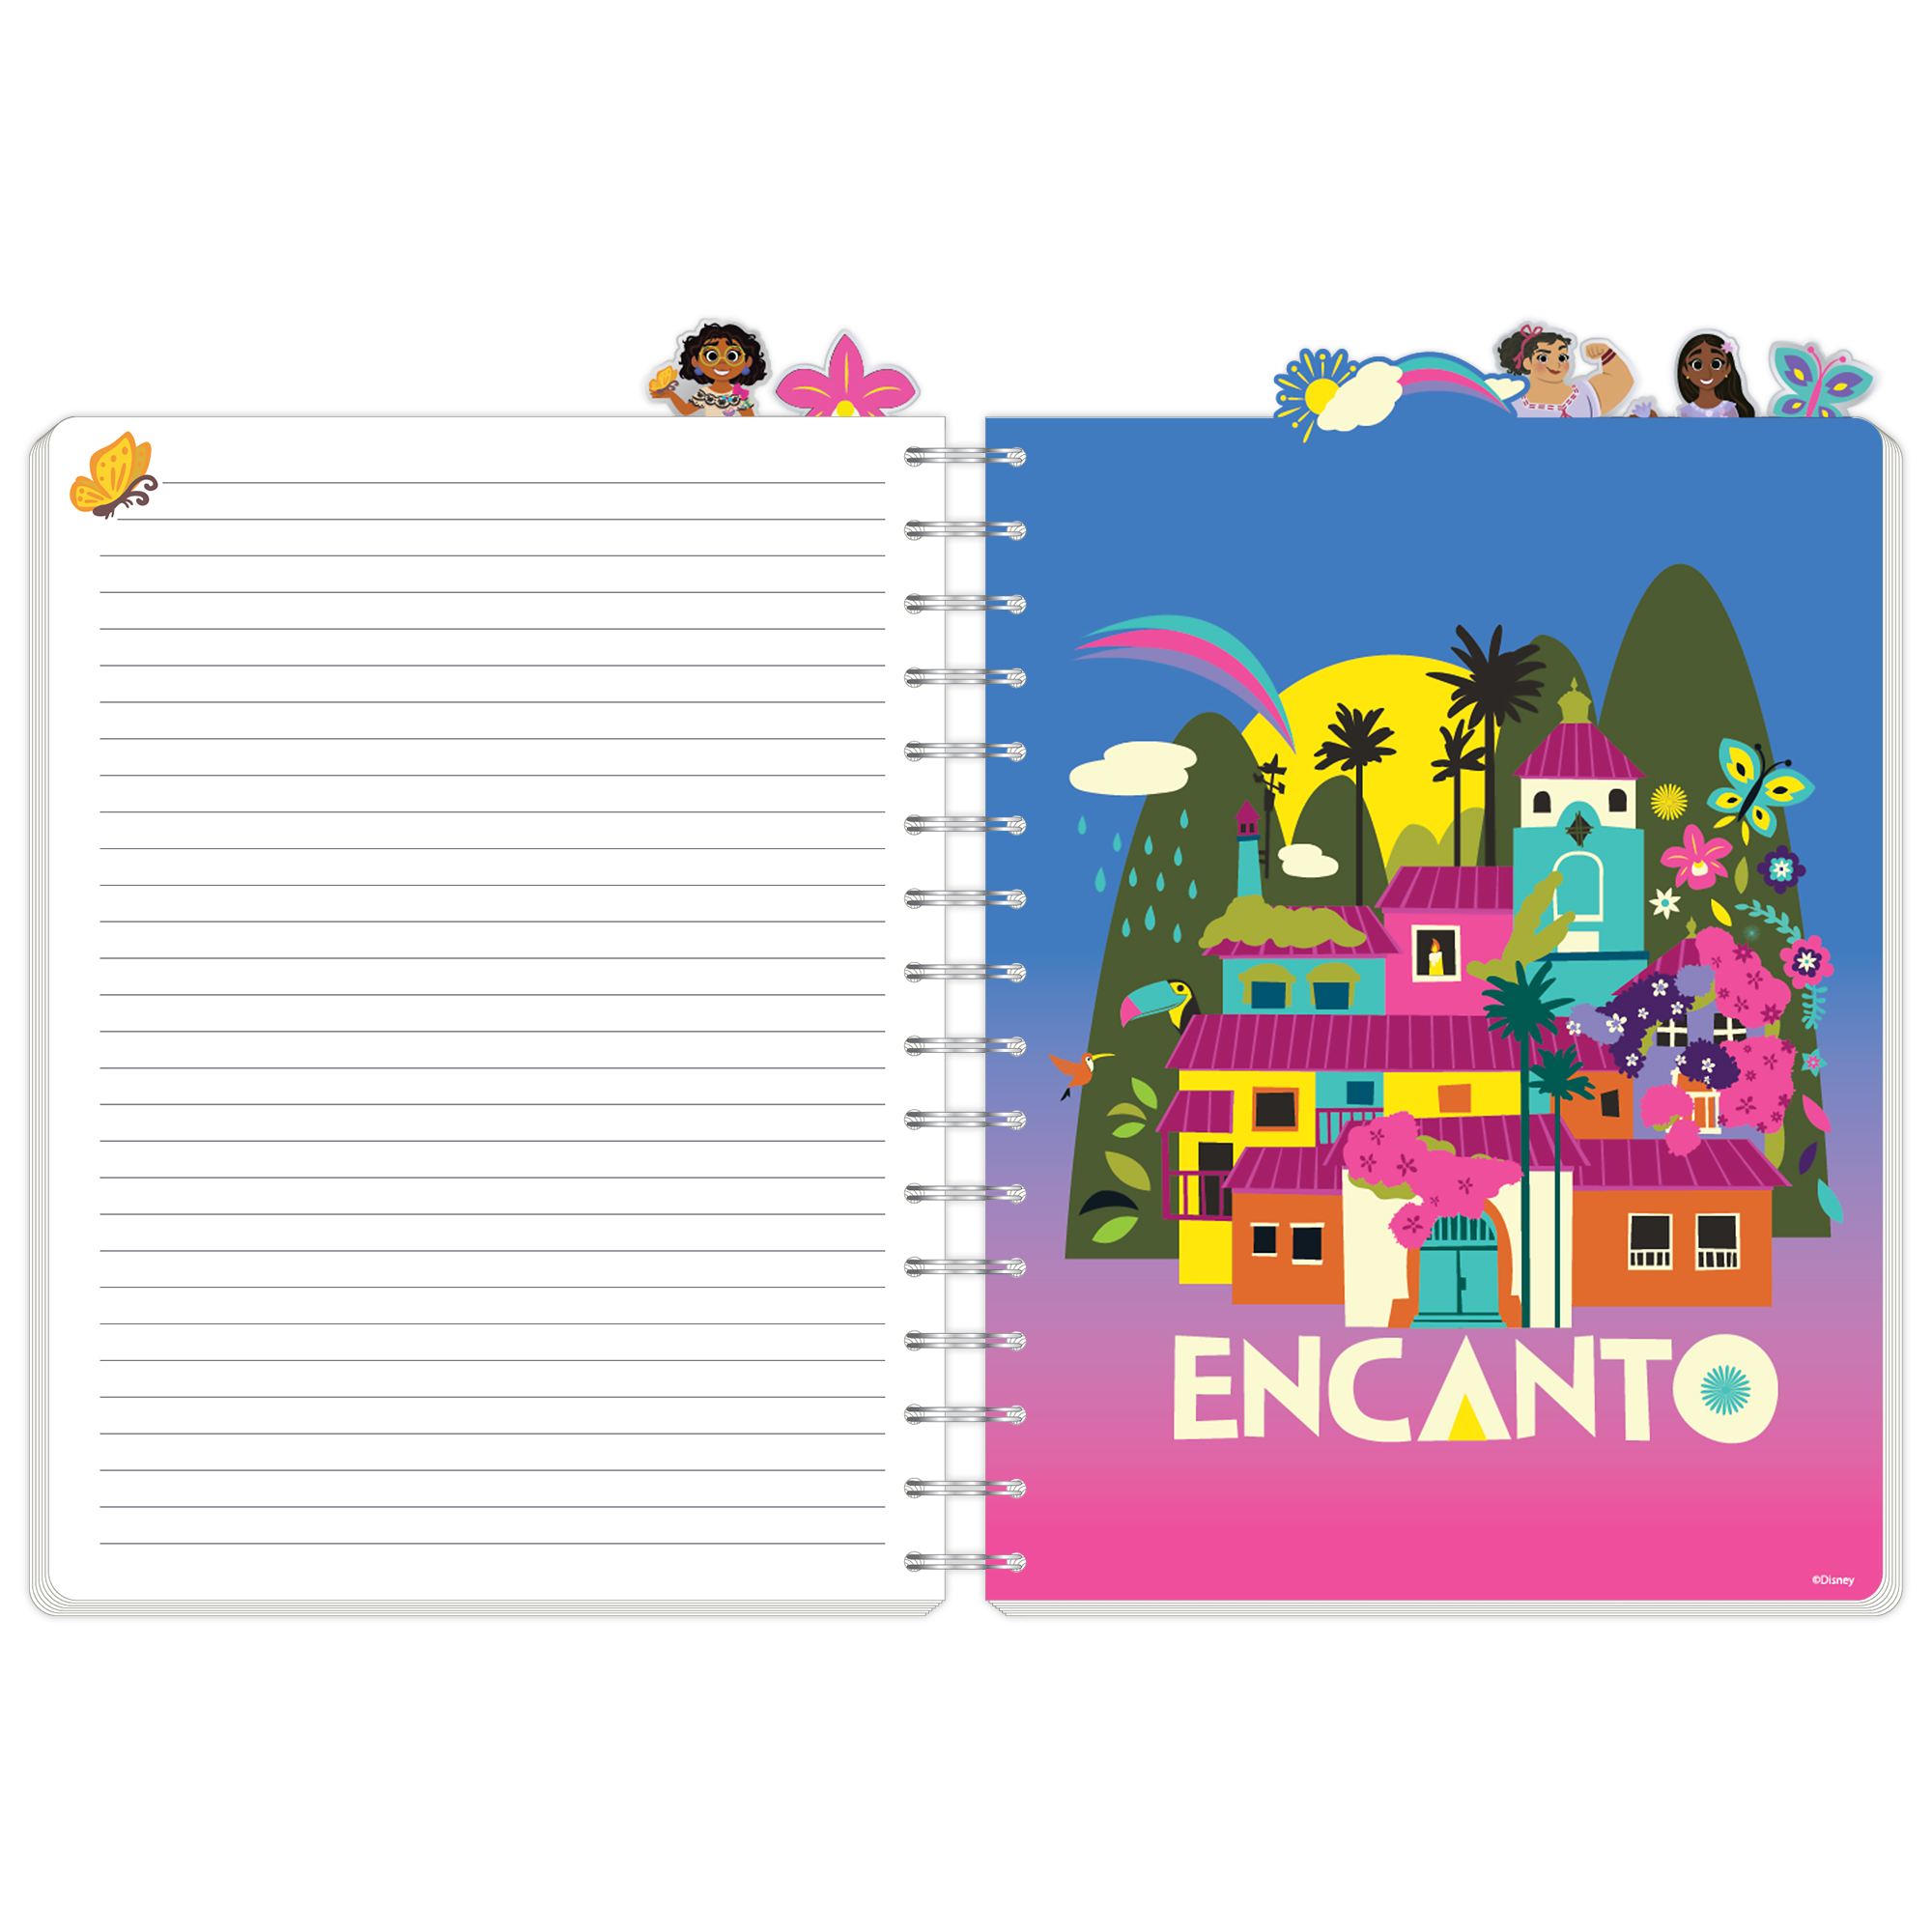 Disney Encanto Tab Journal, Metal Spiral Bound, 144 Lined Sheets, 8.375-inches by 6.5-inches - image 5 of 9